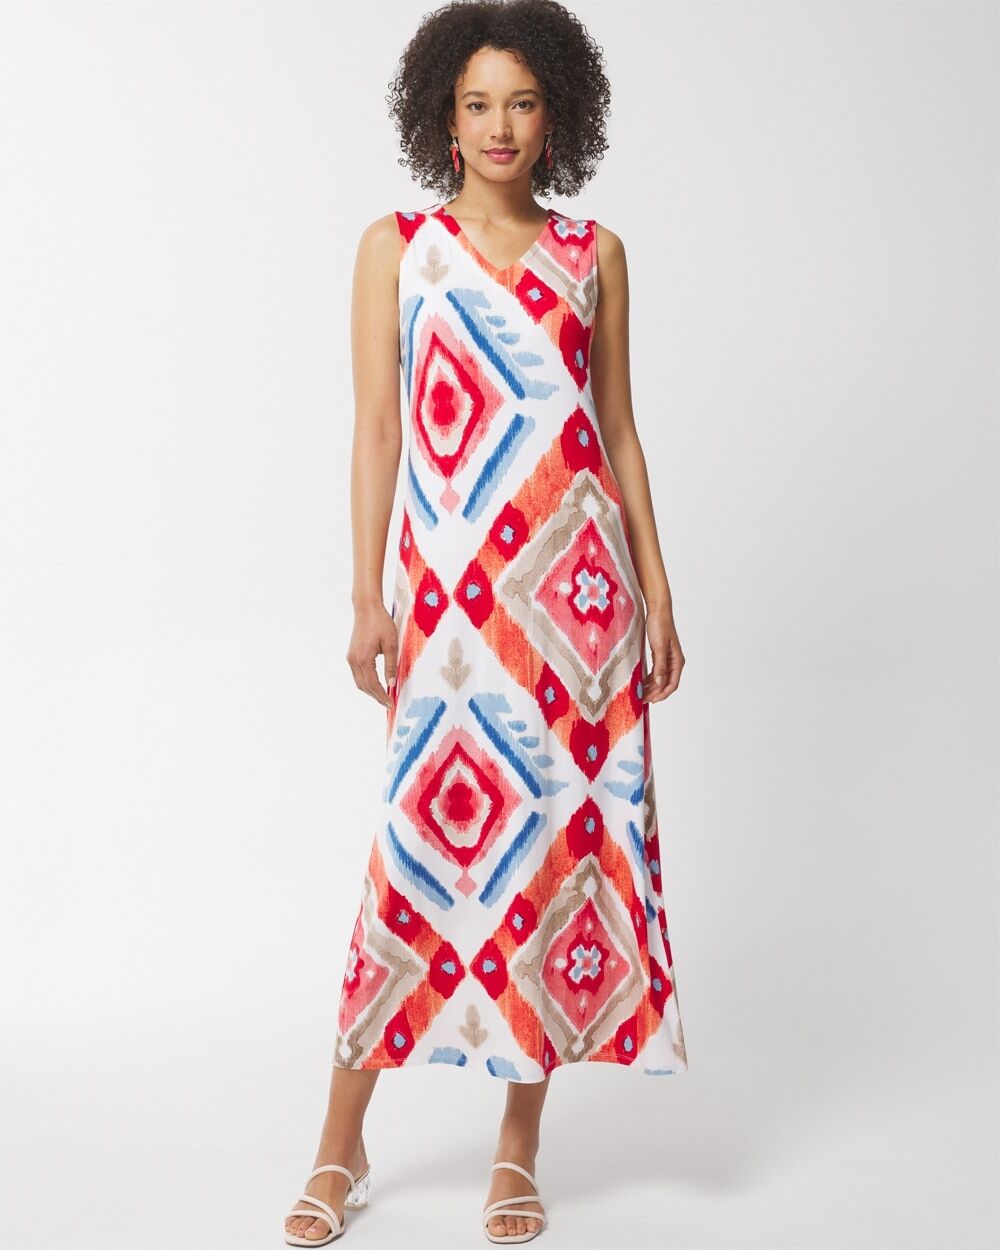 Chico's Off The Rack Women's Exploded Ikat Maxi Dress in Hot Pepper Size 16/18   Chico's Outlet, Spring Dresses - Hot Pepper - Women - Size: 16/18